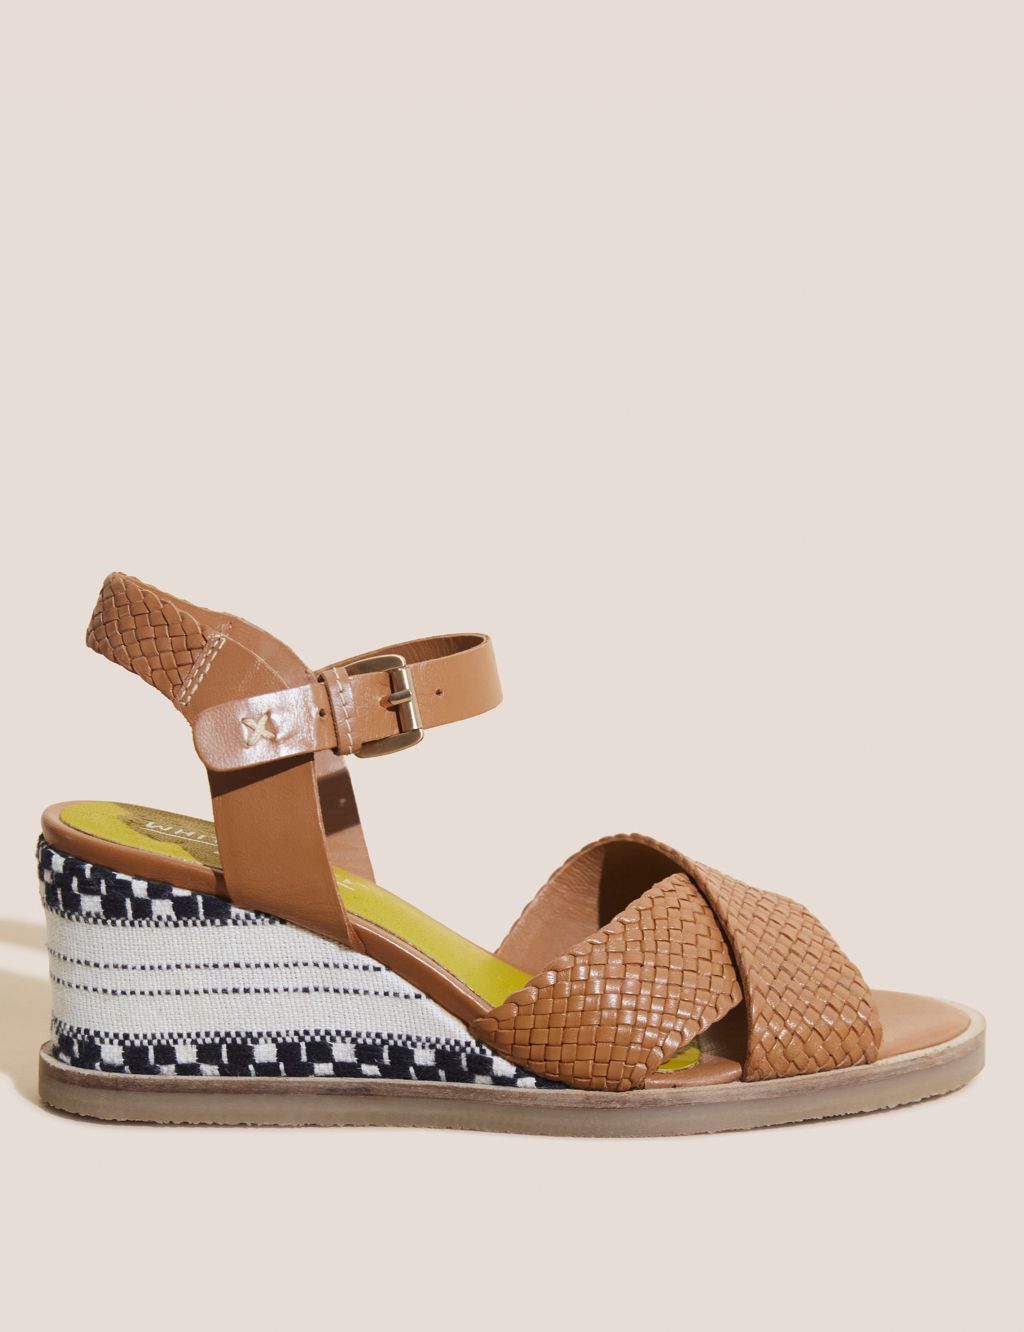 Leather Woven Crossover Wedge Sandals image 1